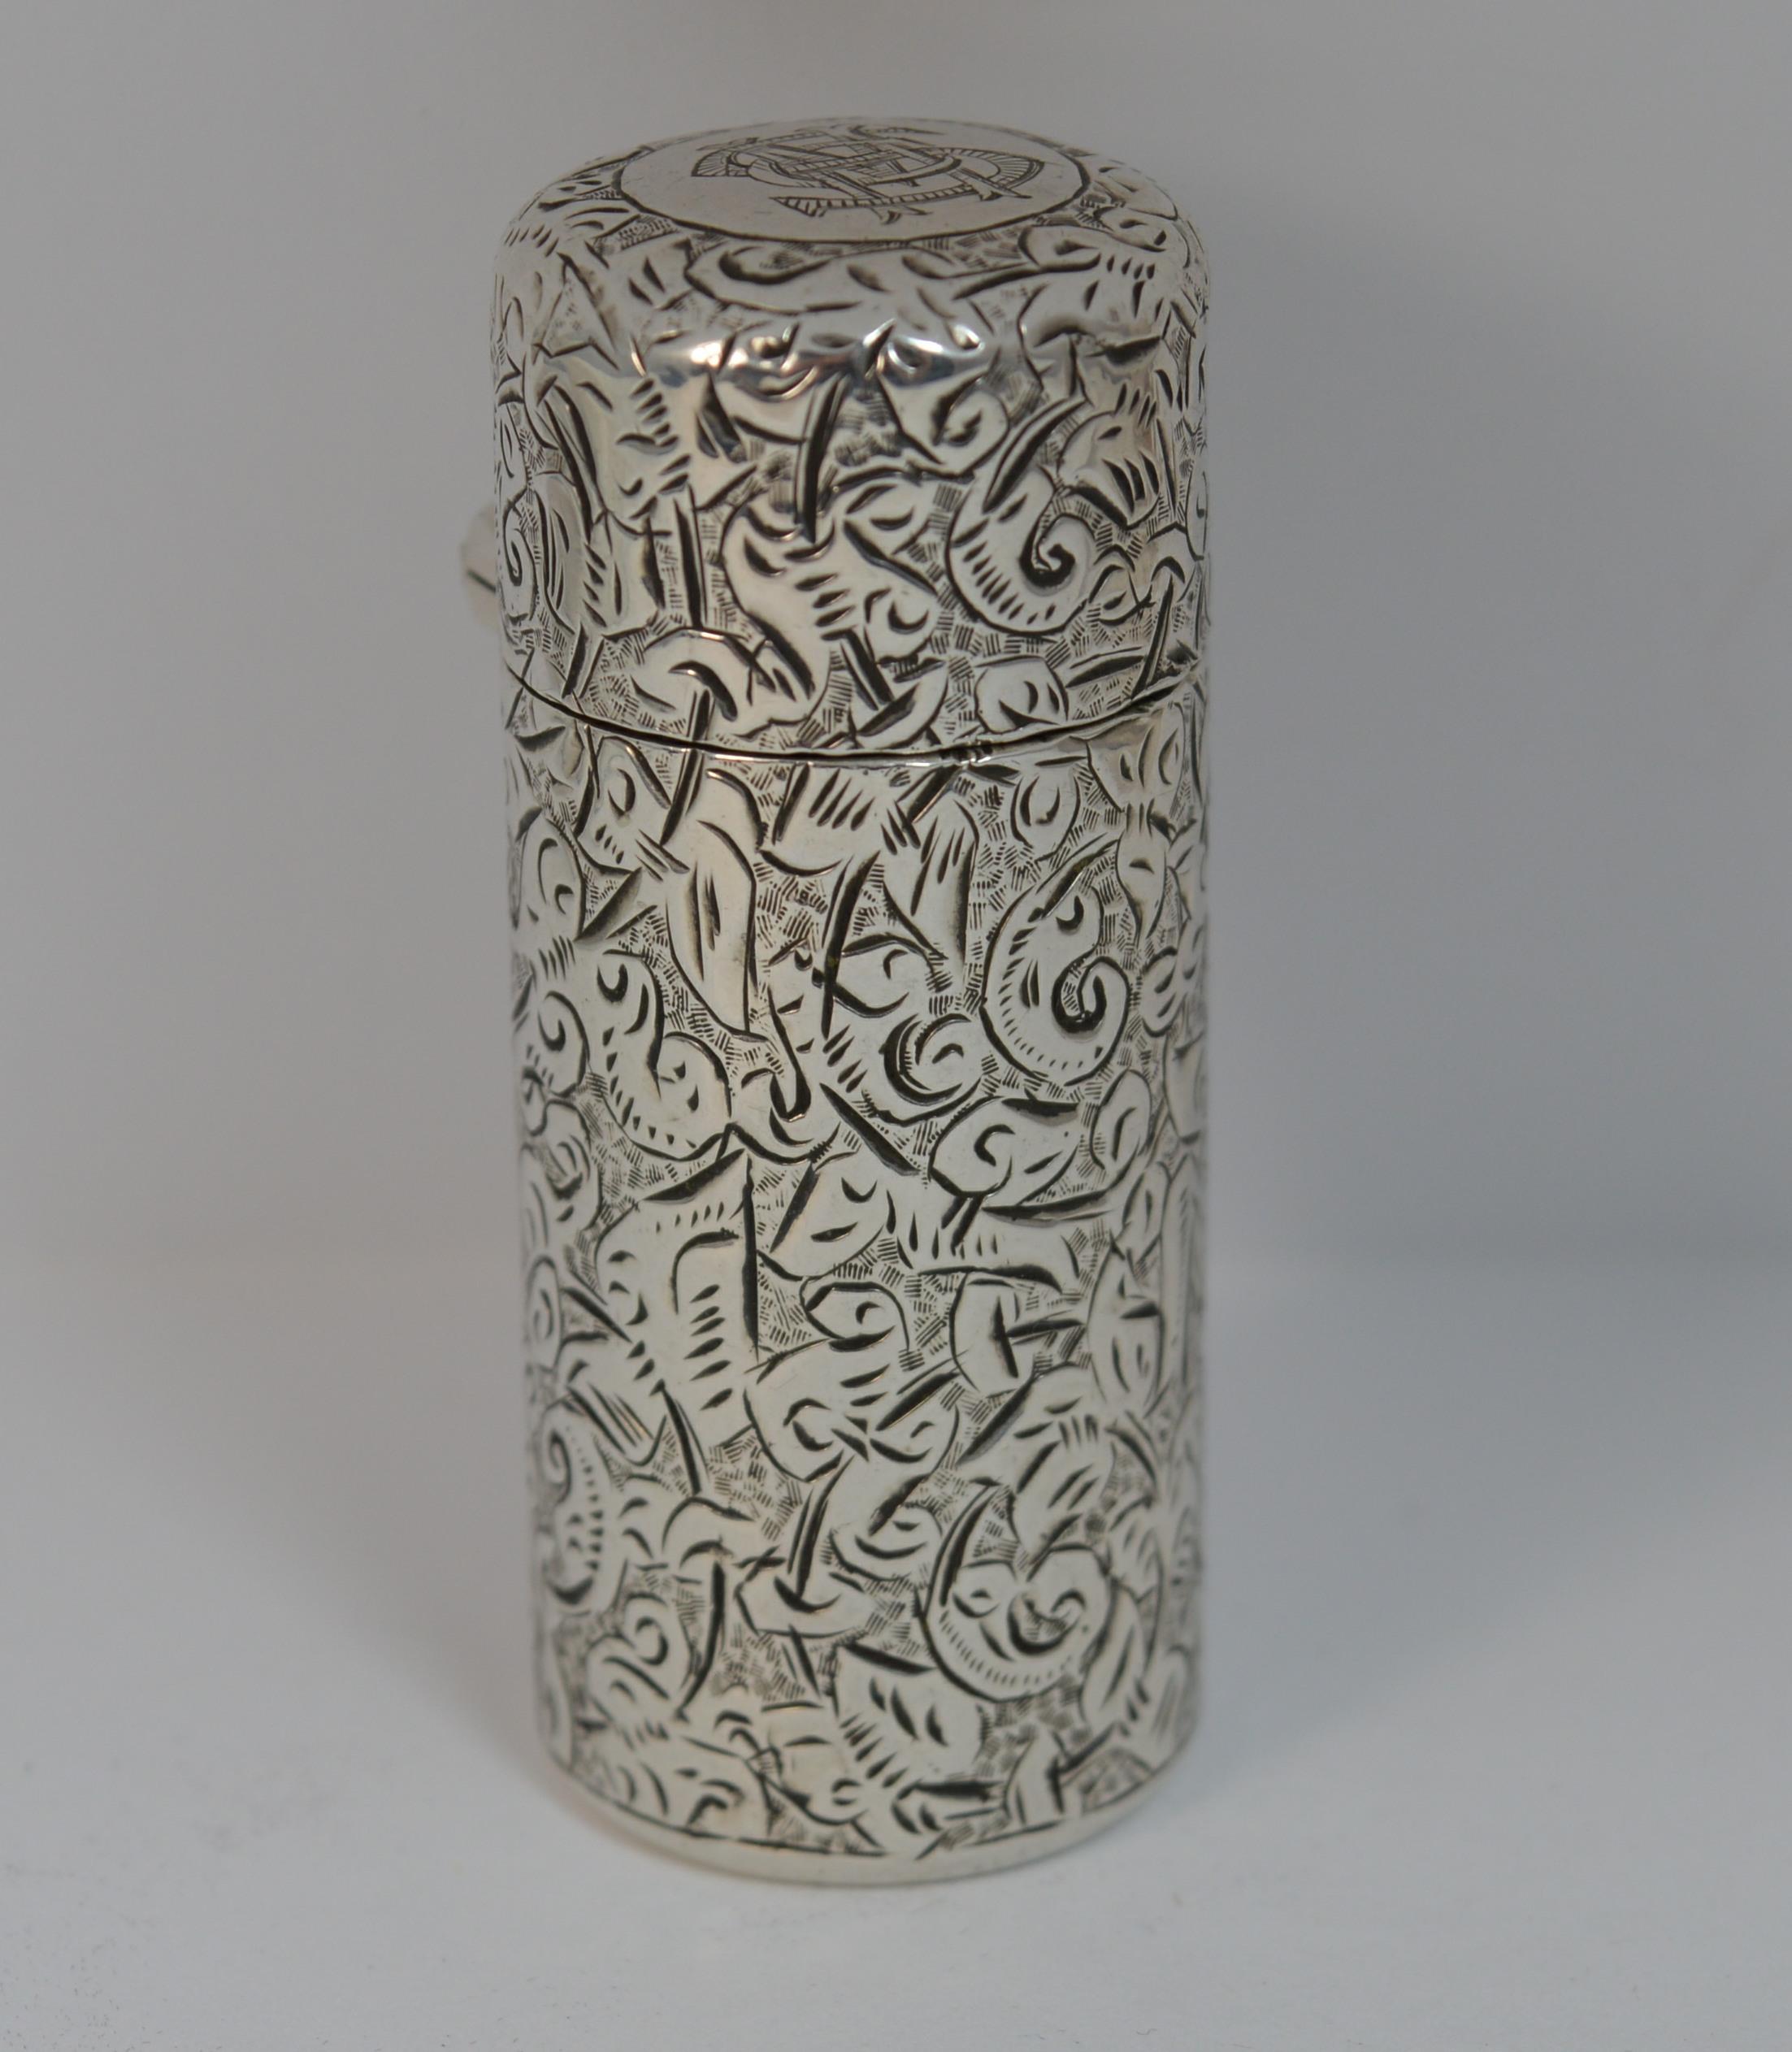 A superb antique solid Silver scent bottle.

Sampson Mordan and Co.

Fine hand engraved pattern throughout.

Tube or cylnder shape.


Hallmarks ; lion, SM & Co, London assay, all quite worn

Size ; 22mm diameter, 55mm long

Weight ; 54.6